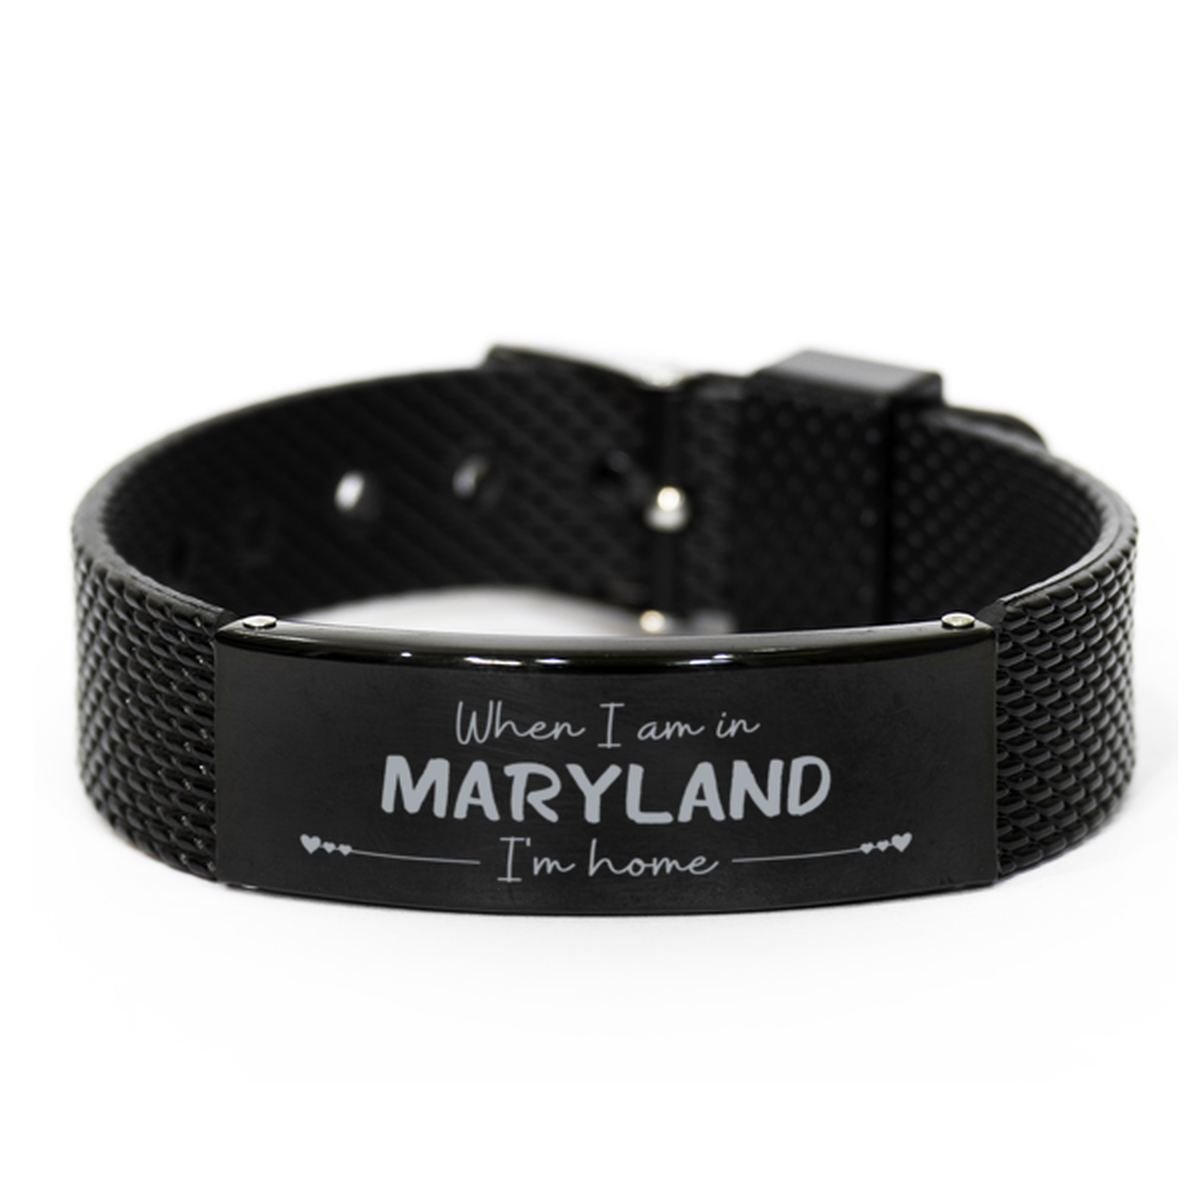 When I am in Maryland I'm home Black Shark Mesh Bracelet, Cheap Gifts For Maryland, State Maryland Birthday Gifts for Friends Coworker